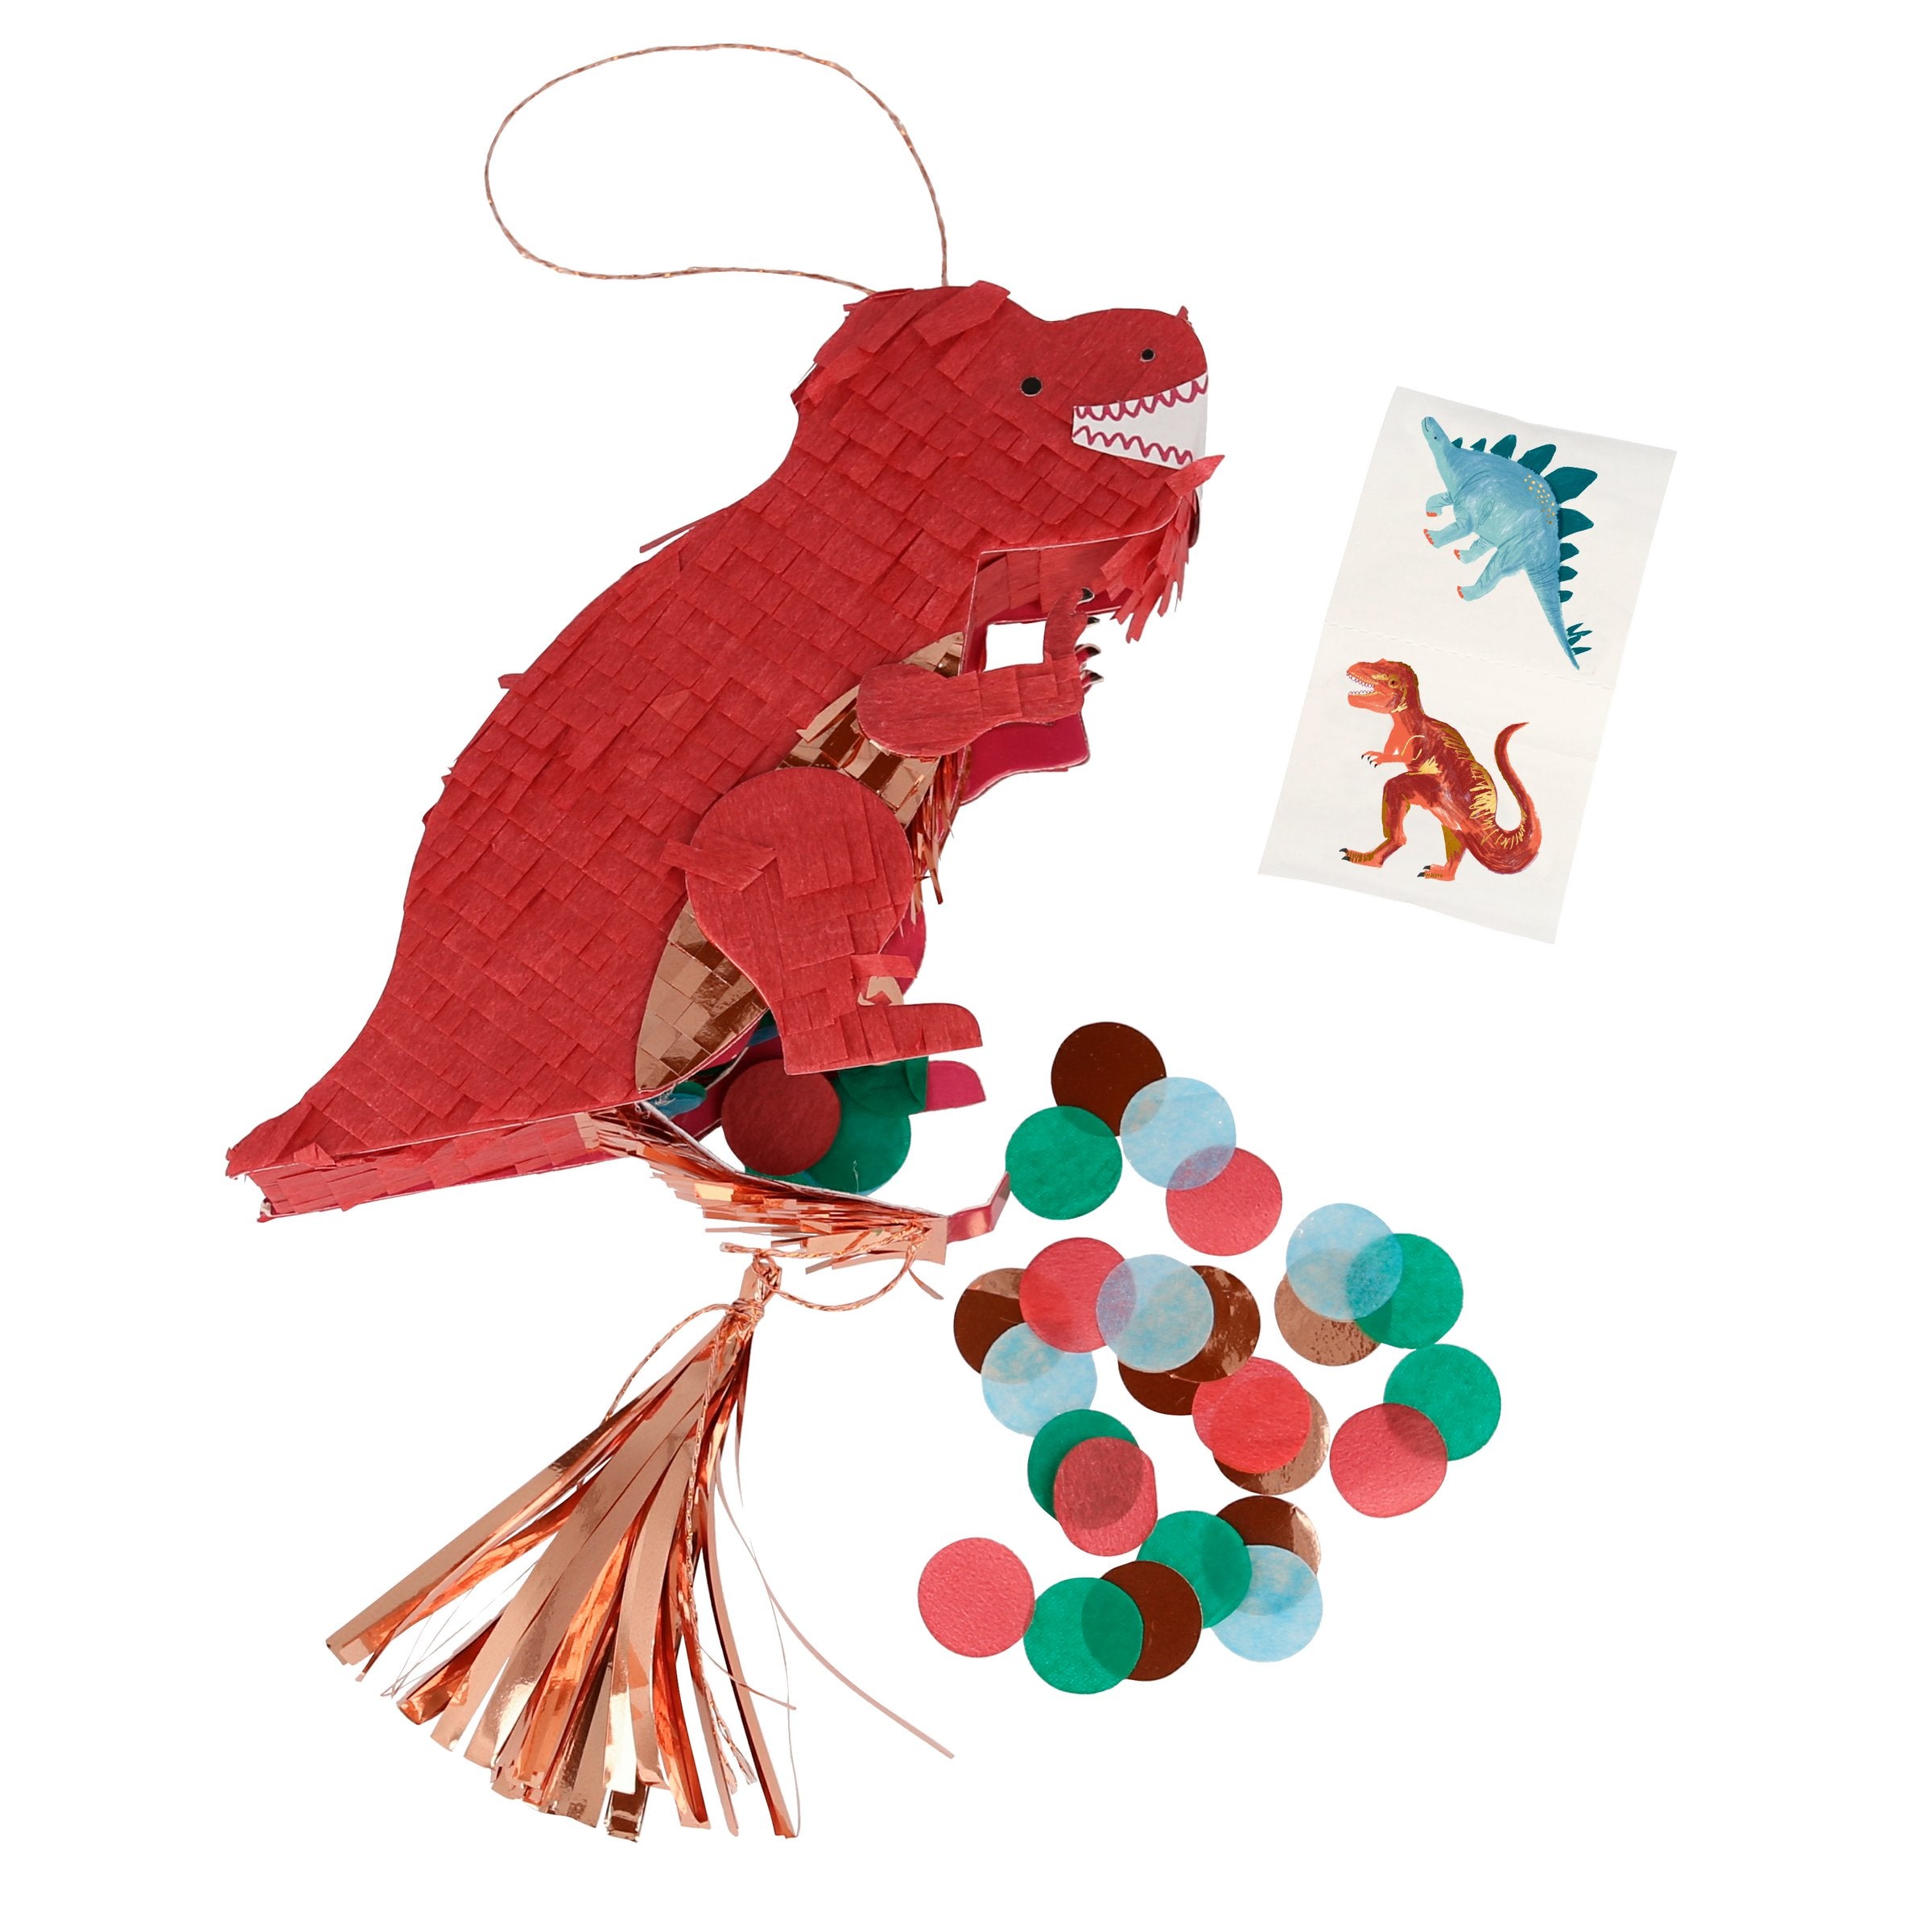 Our little dinosaur pinatas are perfect for a dinosaur birthday party.